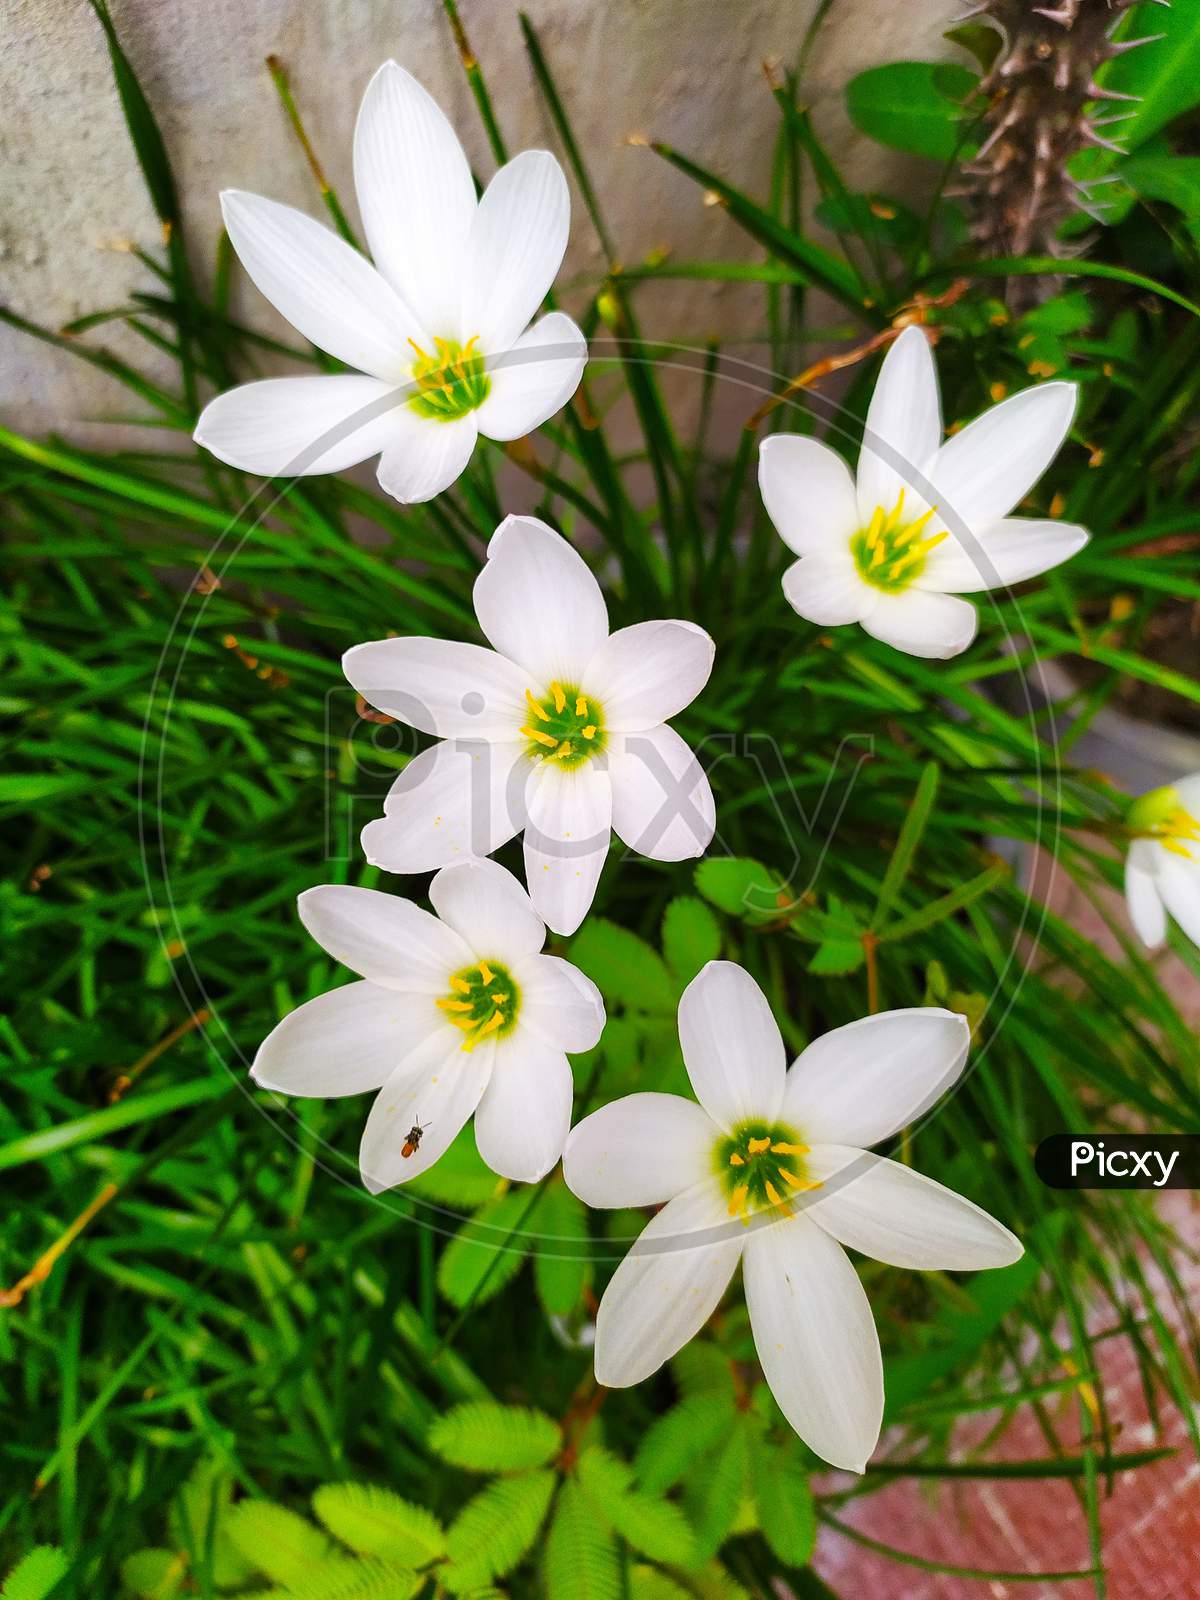 topview of Autumn zephyrlily flowers. scientific name is Zephyranthes candida. other commons names are rain lily, white windflower and Peruvian swamp lily.